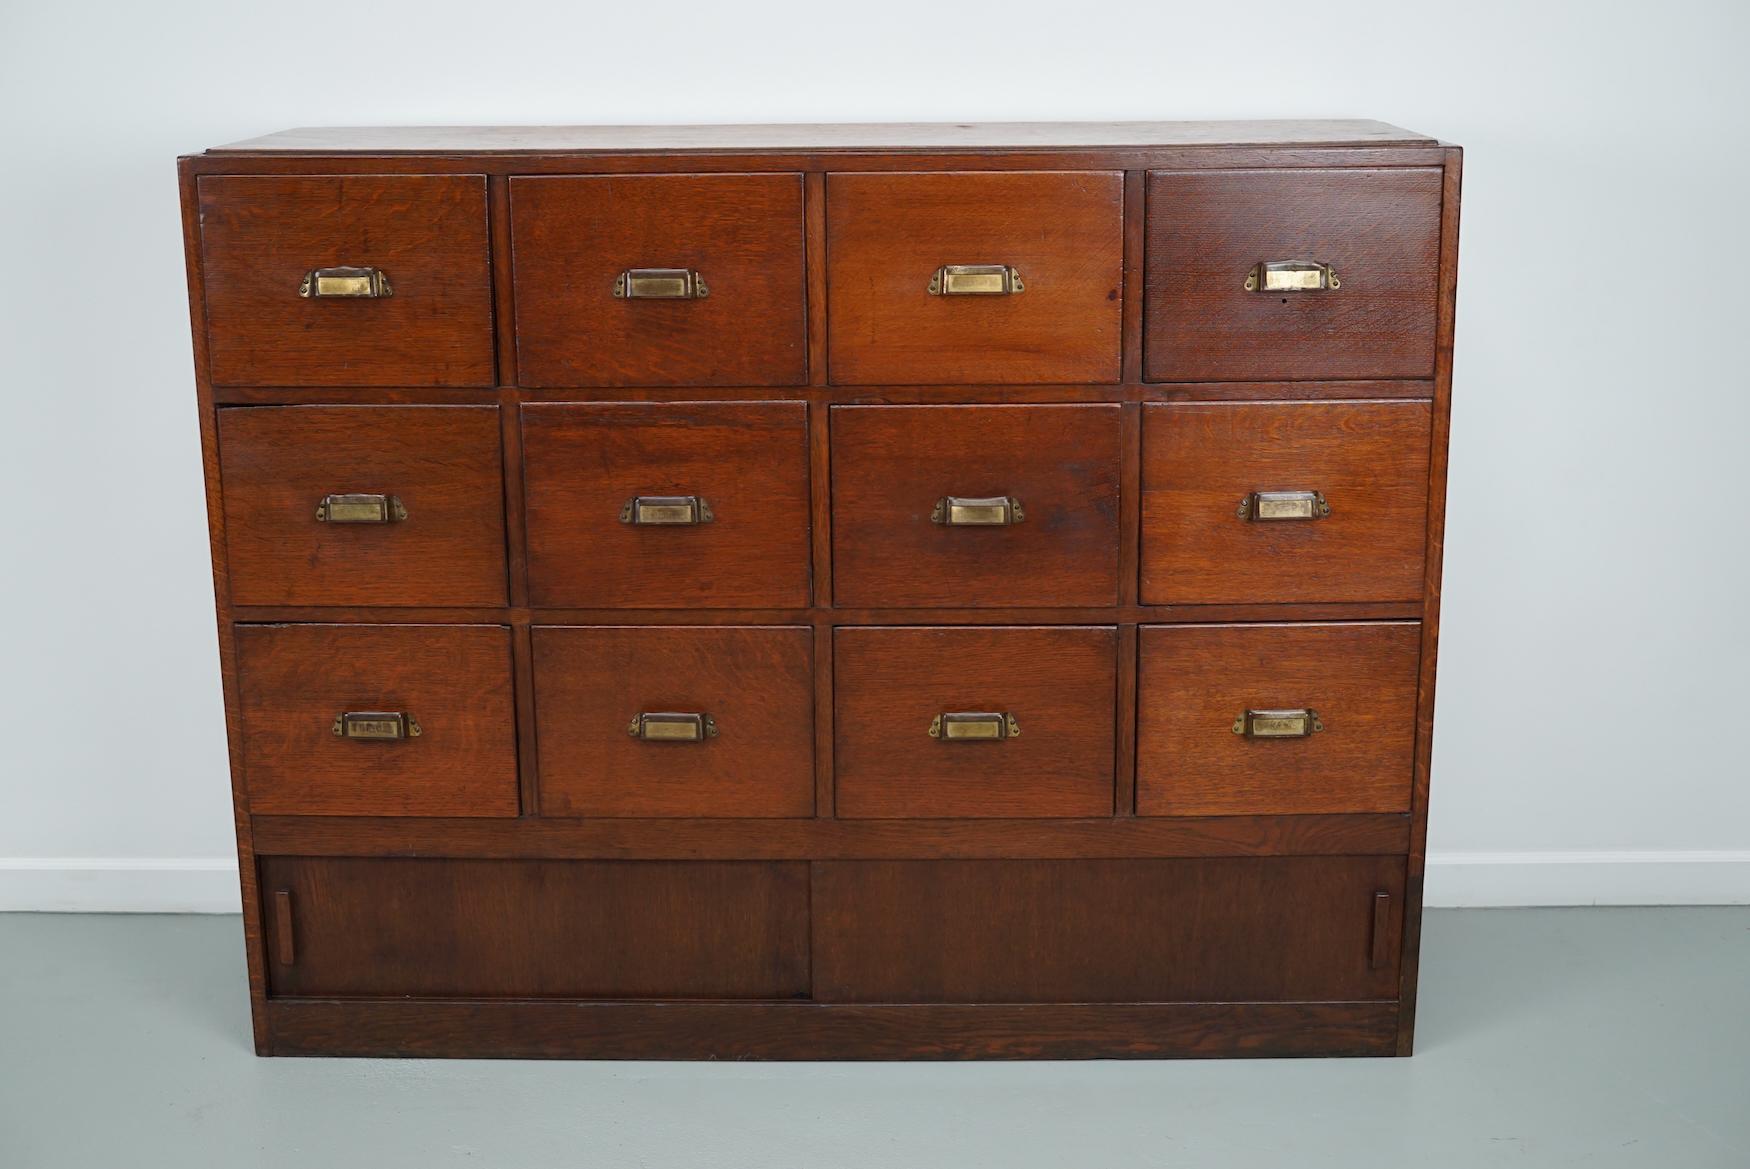 This apothecary / filing cabinet was produced during the 1930s in the Netherlands. This piece features 12 drawers and two sliding doors. The interior dimensions of the drawers are: DWH 34 x 27 x 14 / 18 cm